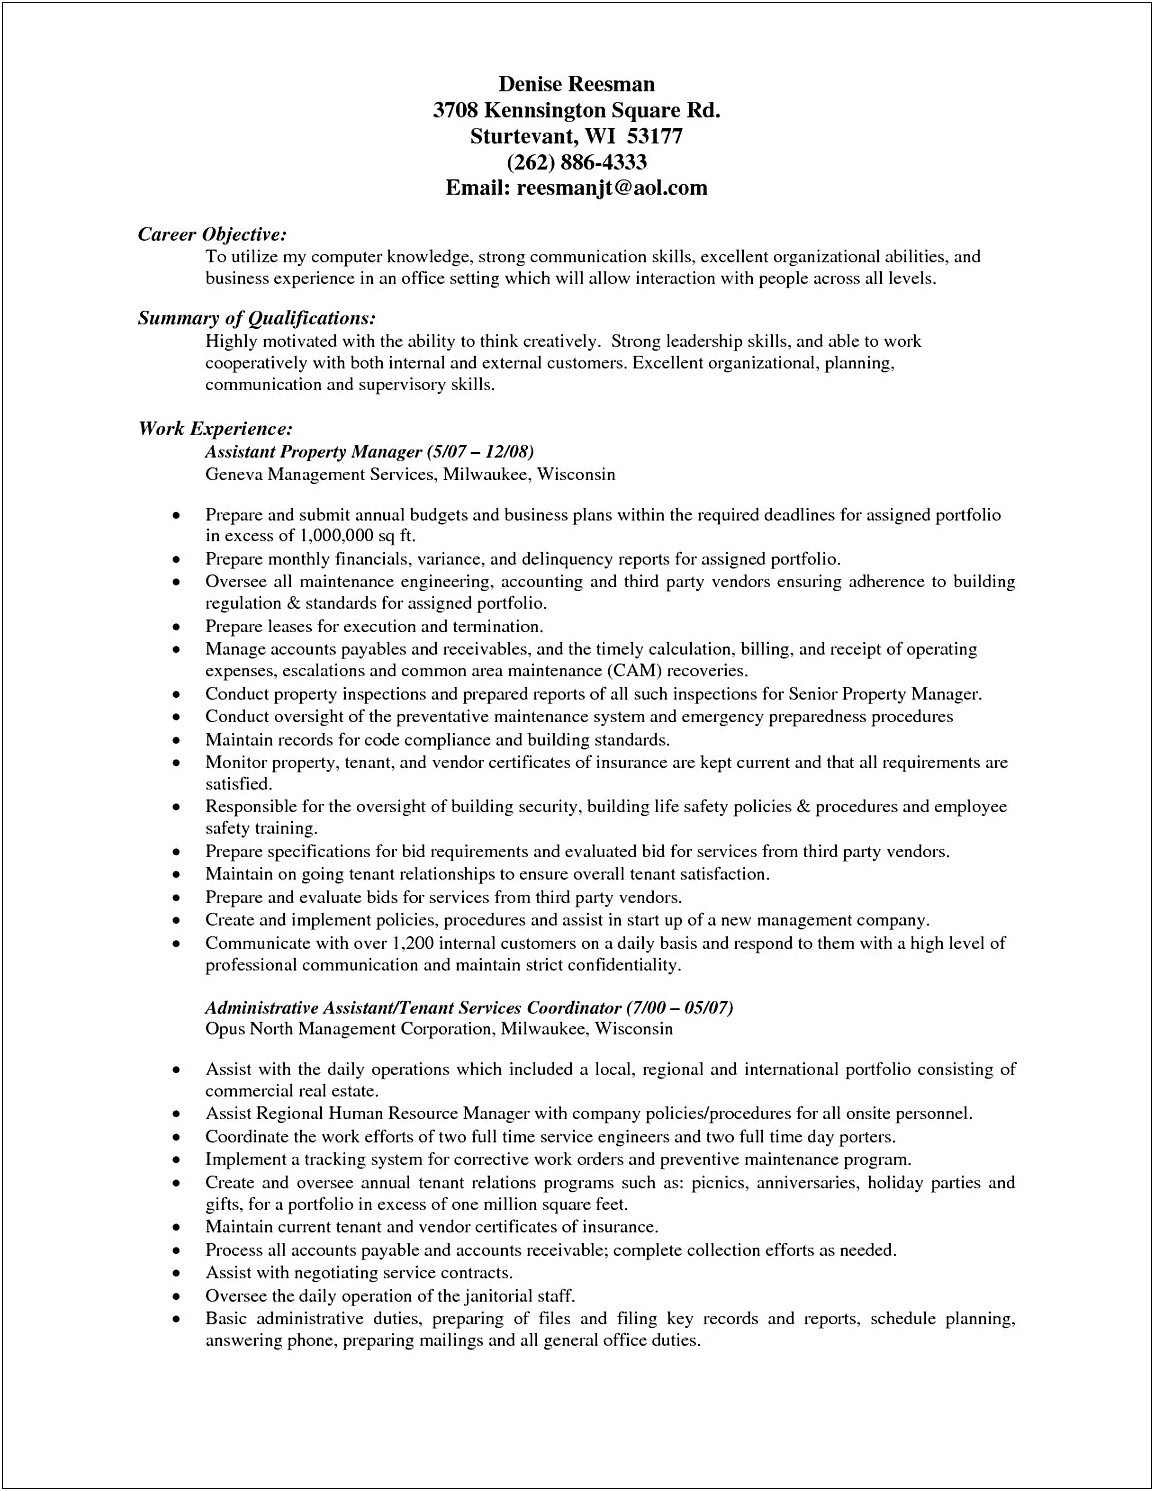 Sample Resumes Foe Assistant Property Manager